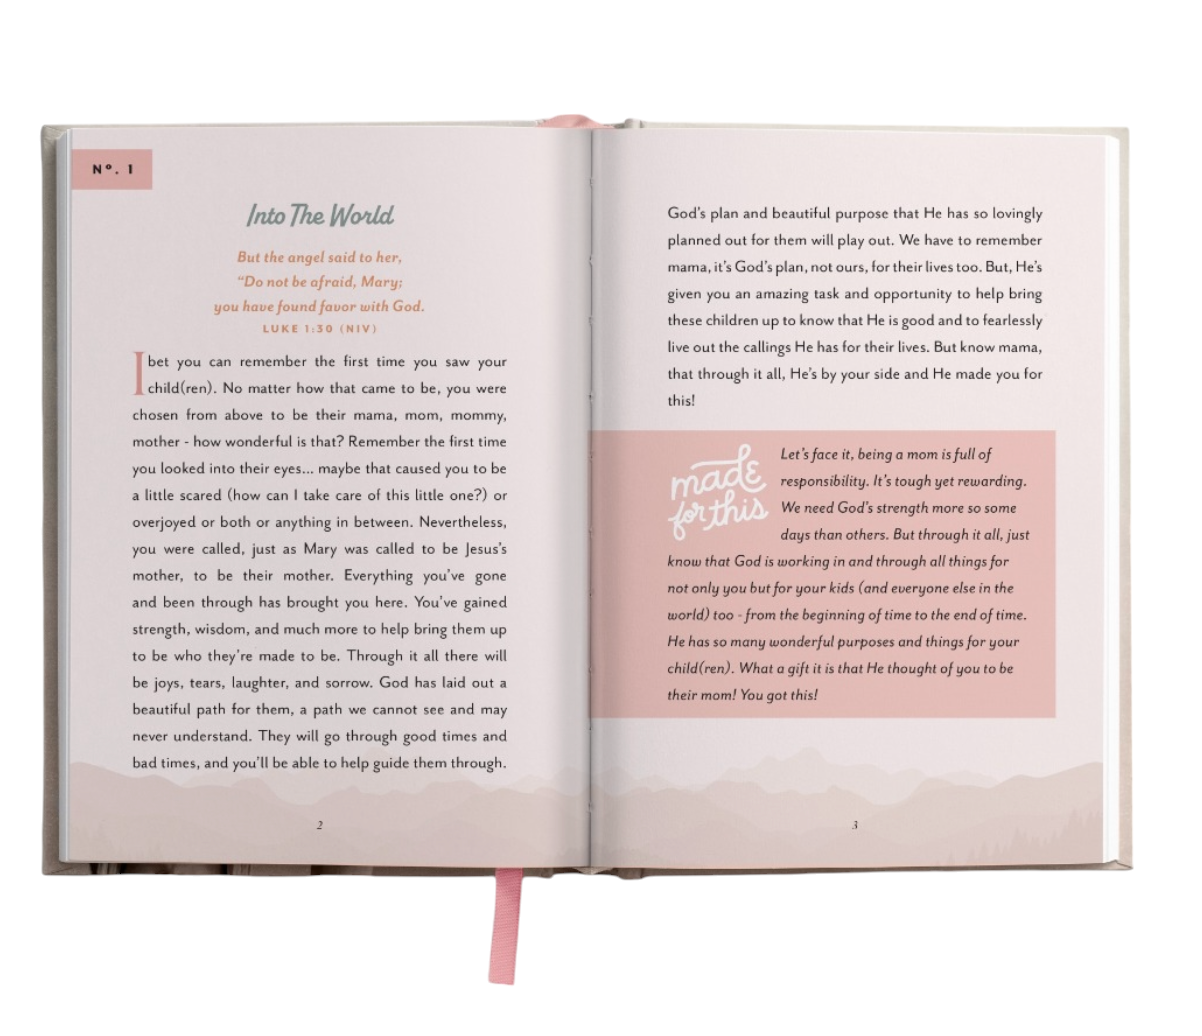 You are Made for This: Devotions to Uplift & Encourage Busy Moms